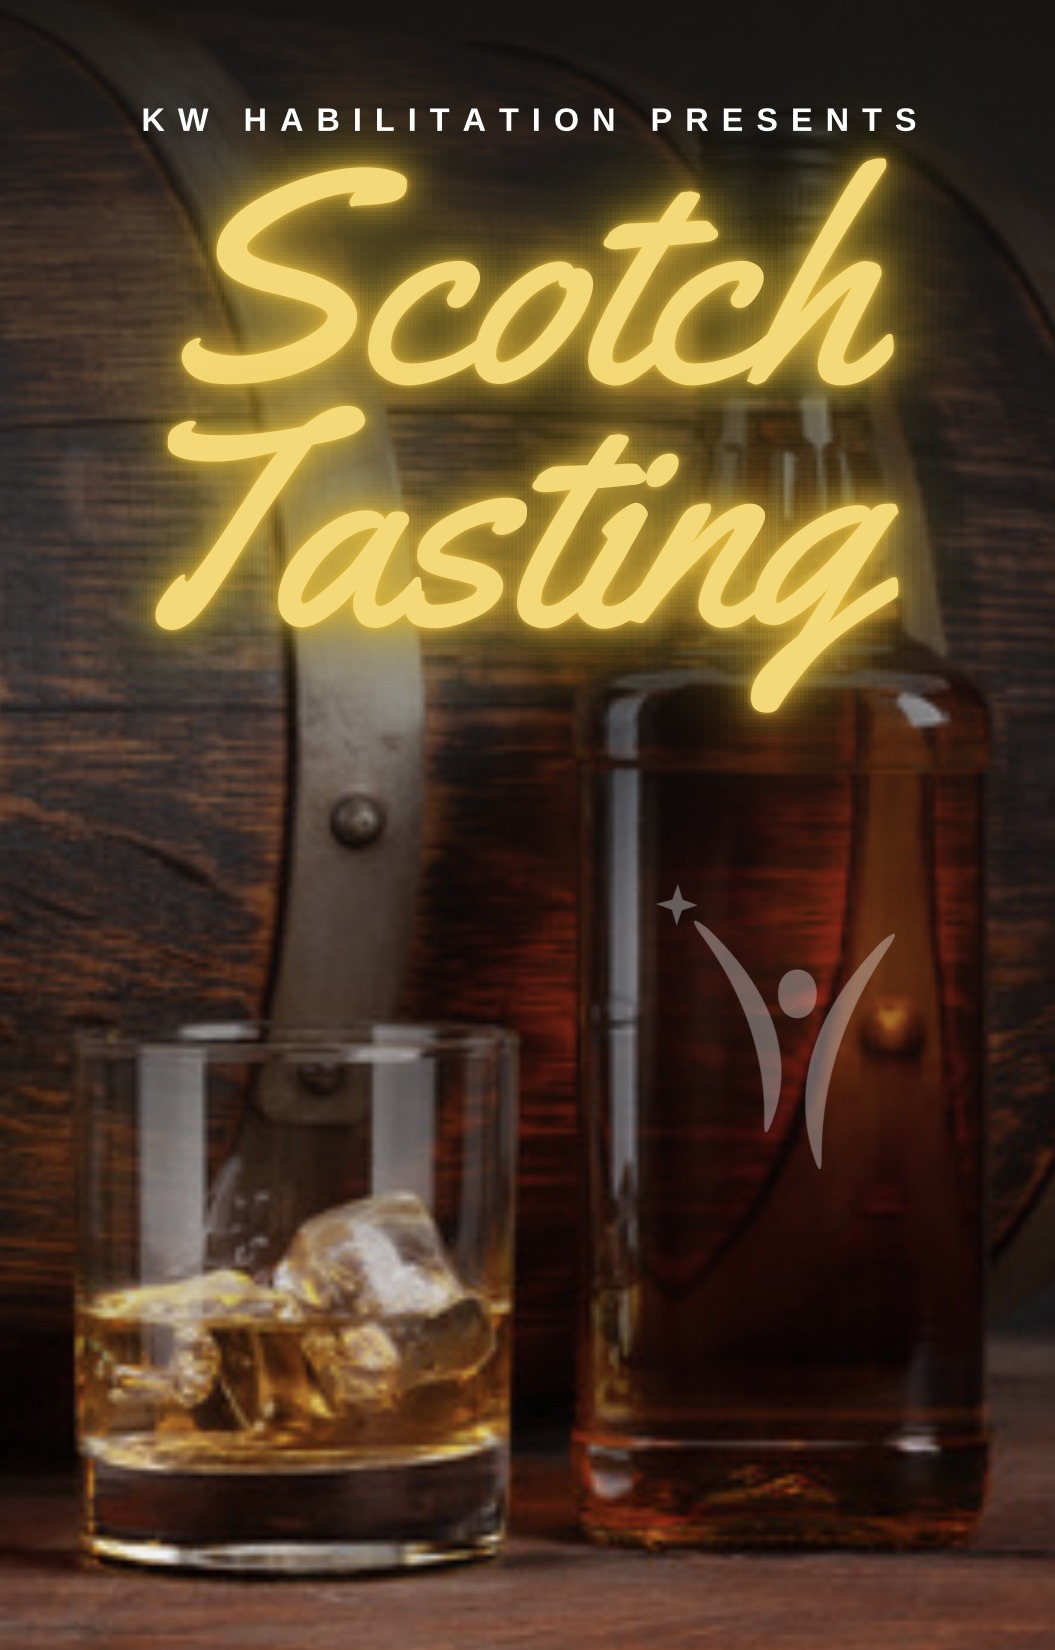 Poster of KW Habilitation's 2023 Annual Scotch Tasting Event